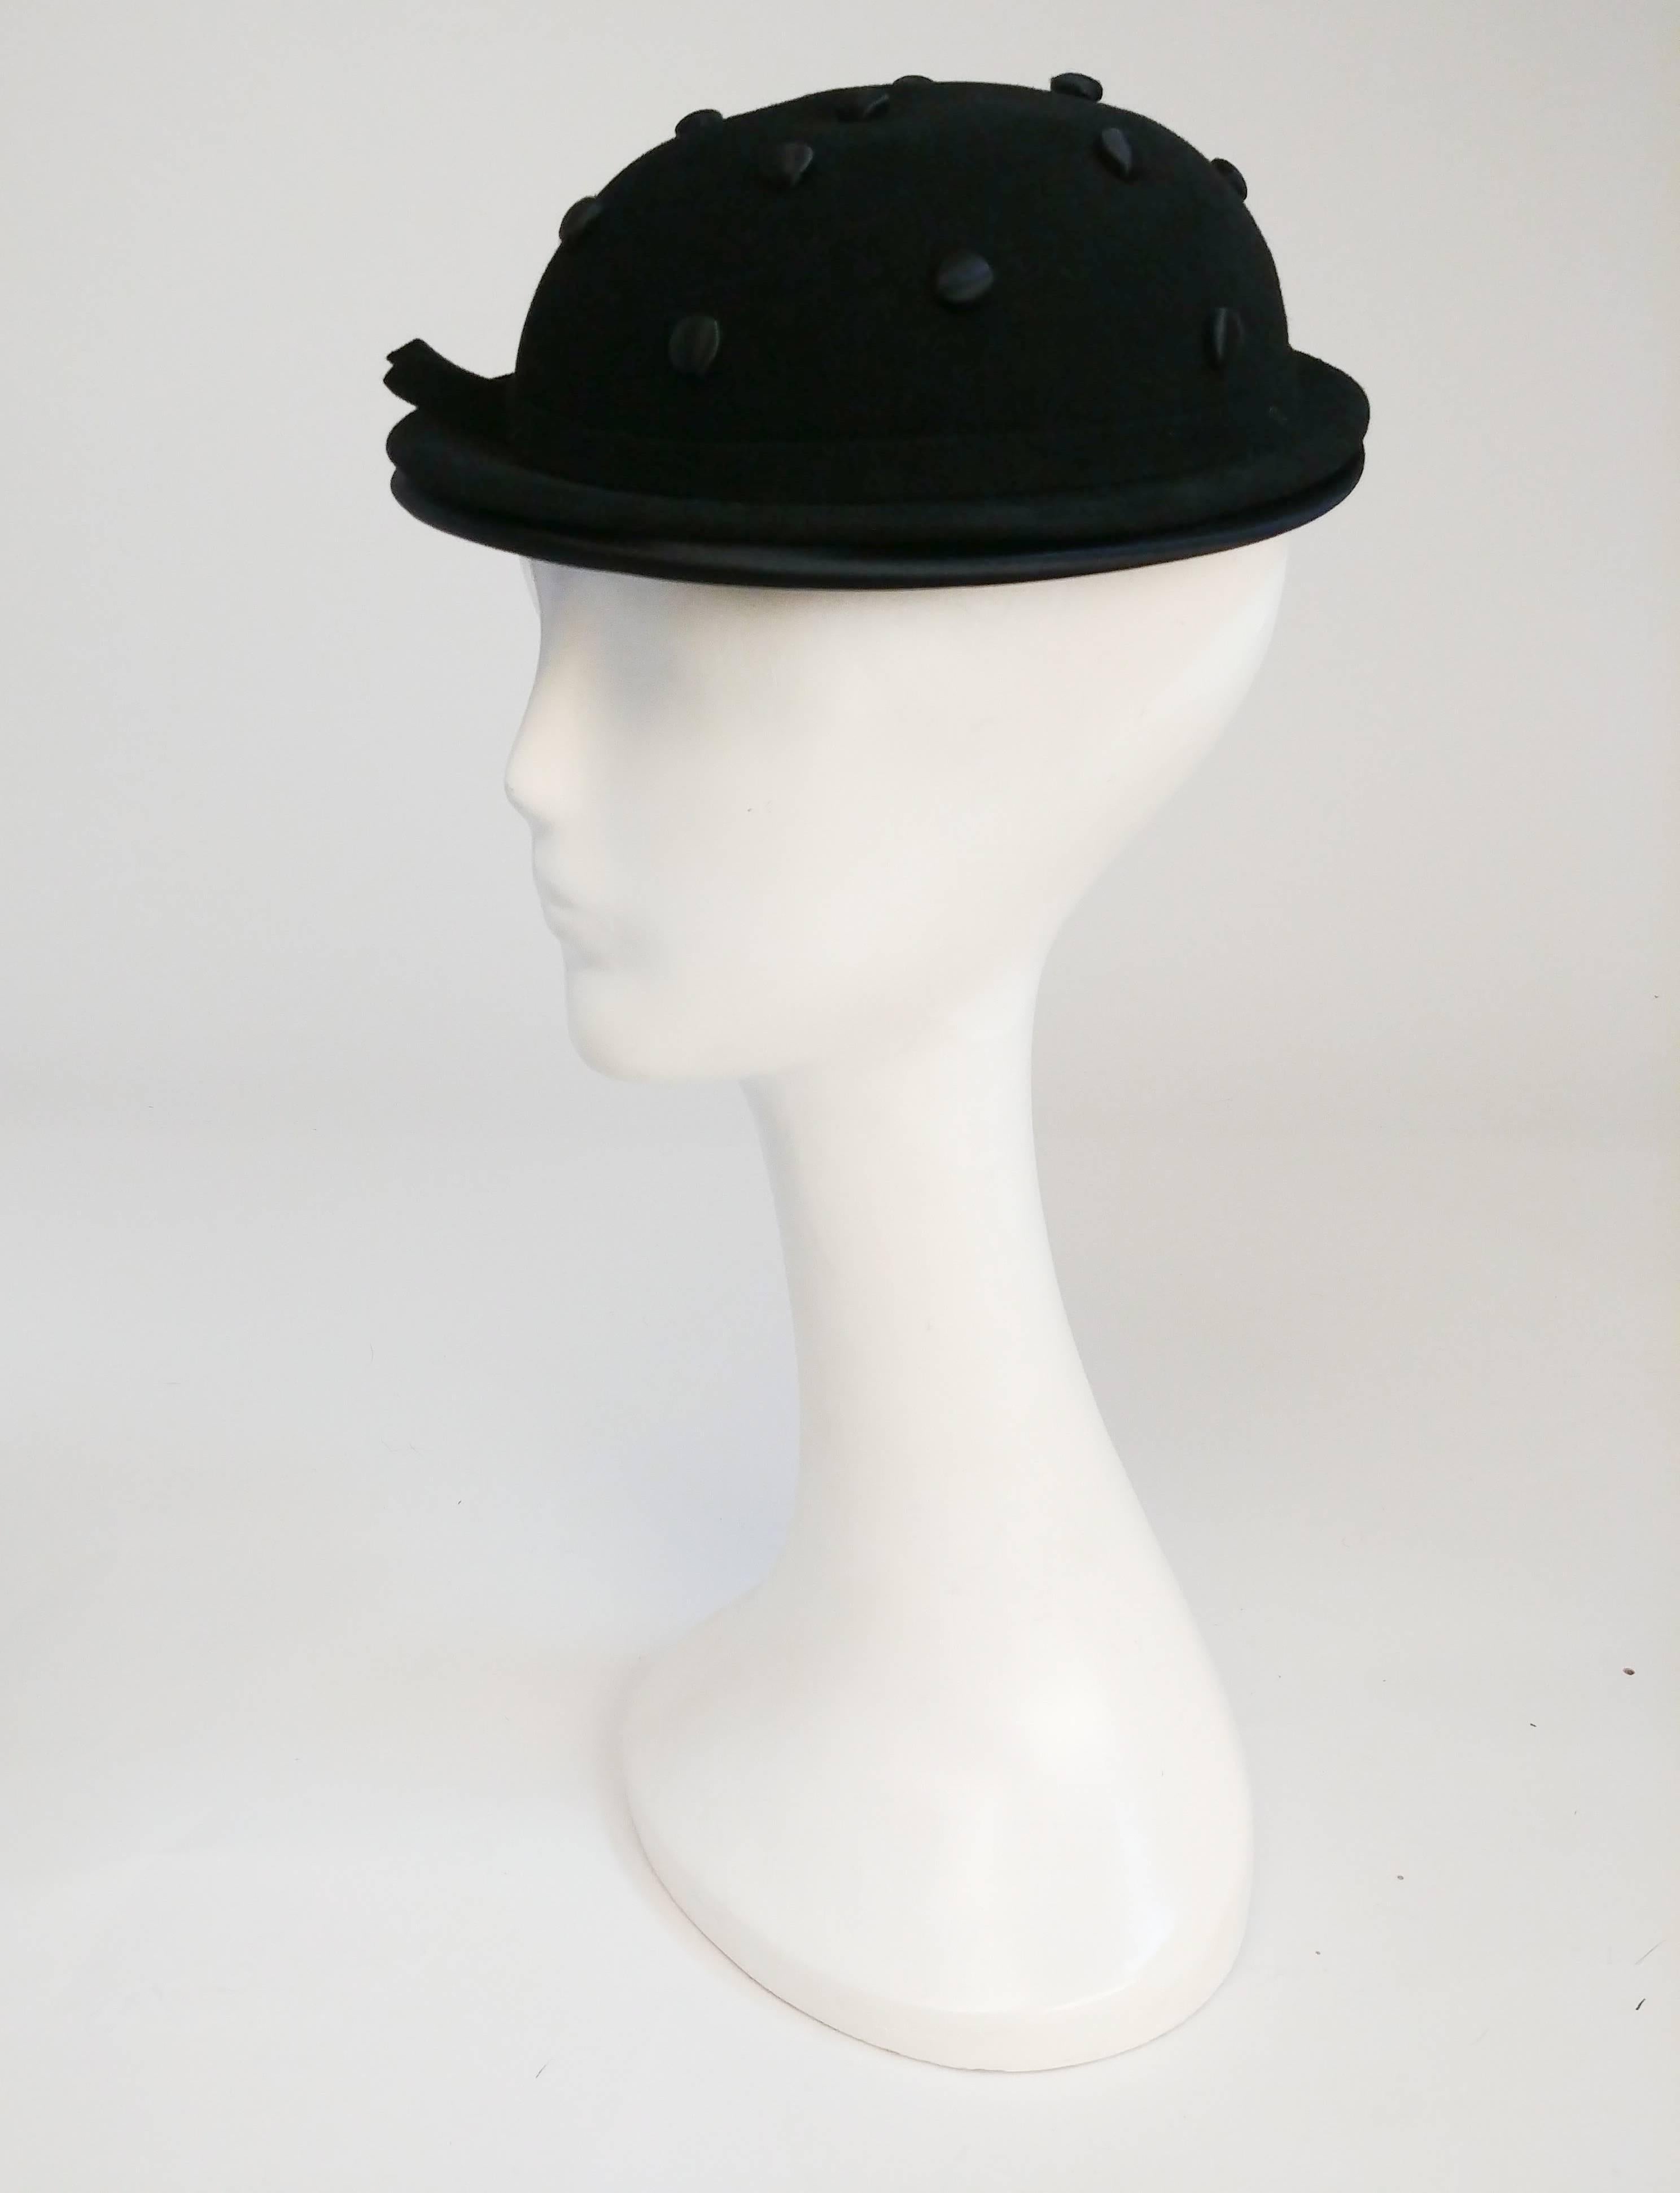 1930s Black Hat w/ Covered Buttons.Black fur felt hat with satin covered buttons and inner brim and elastic band secures hat to head. Size 22 inch